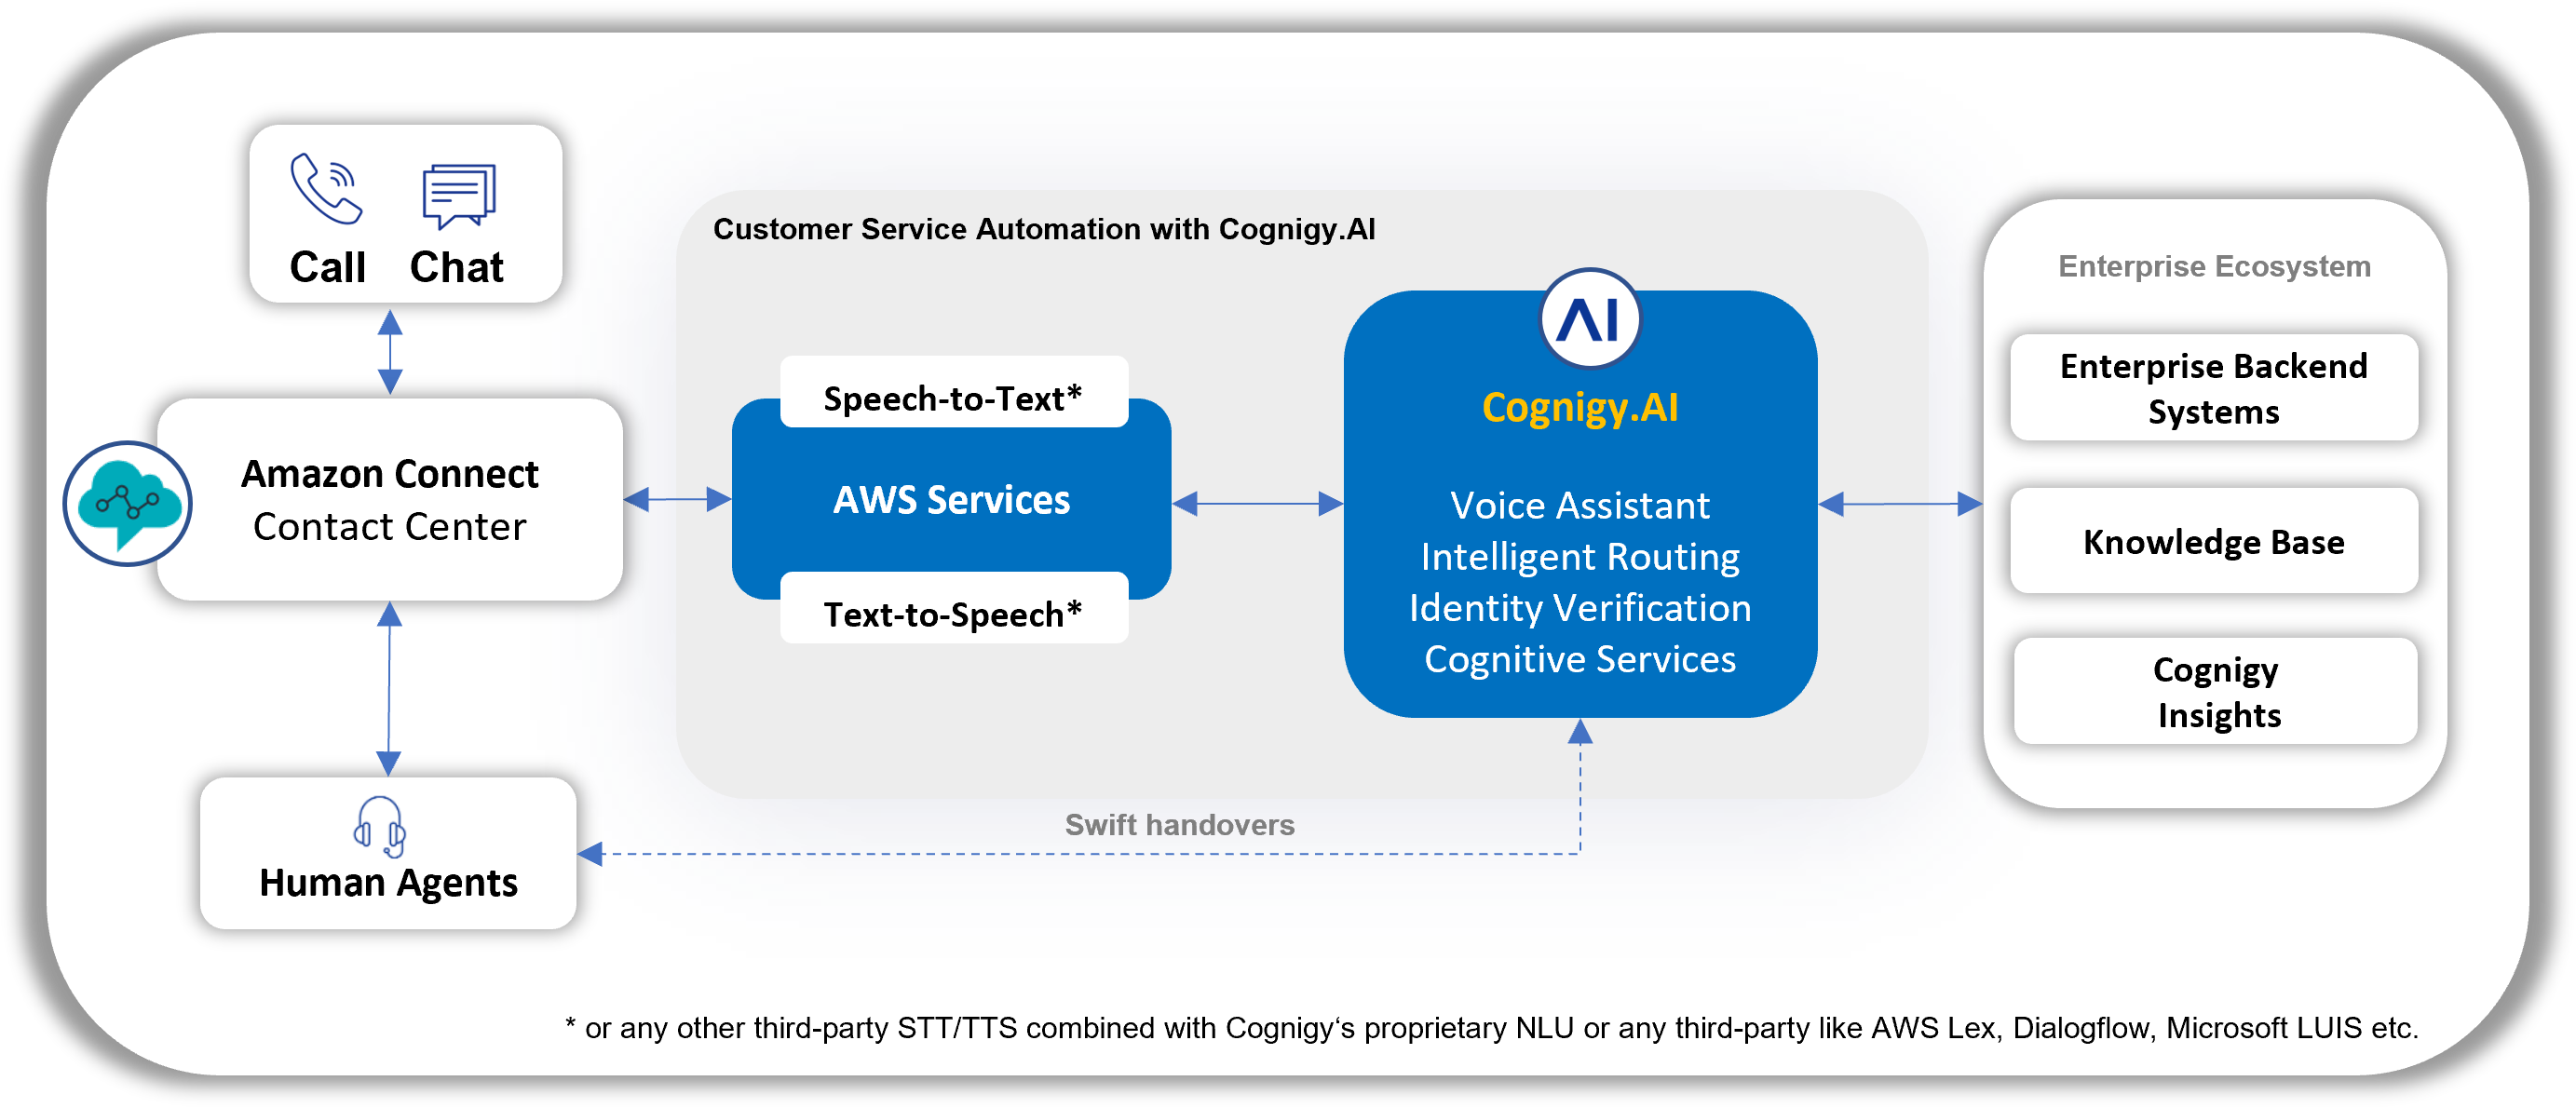 Customer Service Automation with Cognigy.AI